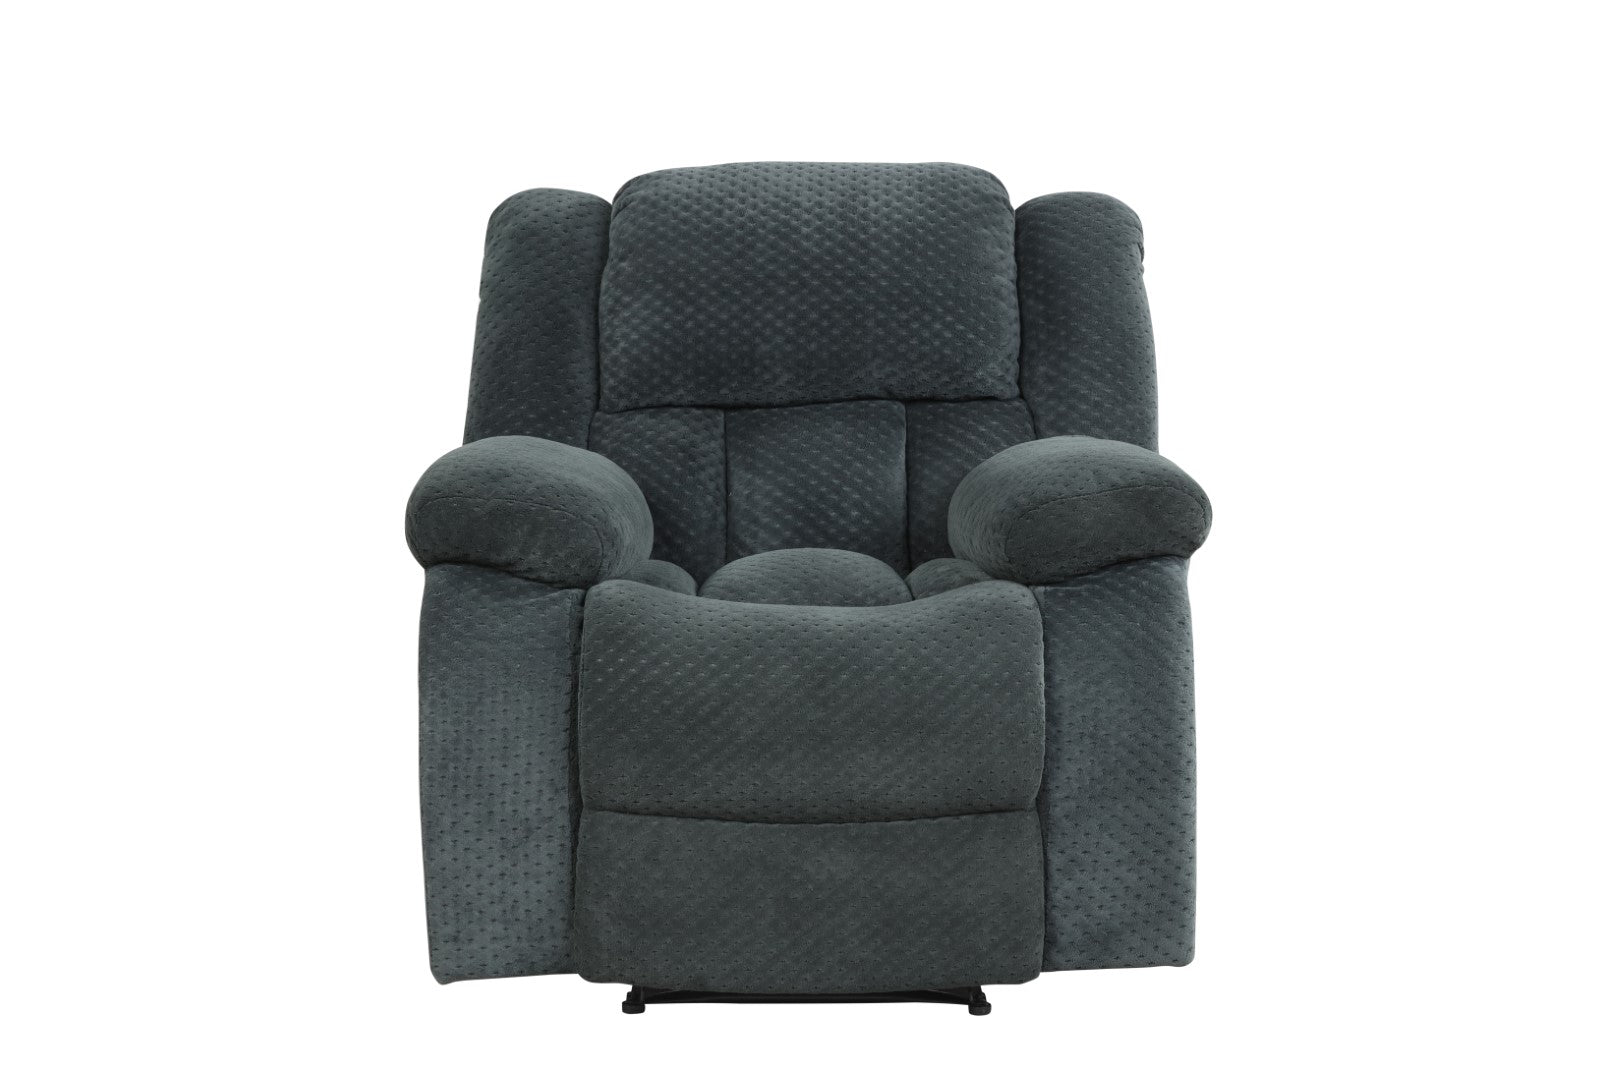 Galaxy Home Armada Manual Reclining Chair Made with Chenille Fabric Green Chenille Fabric